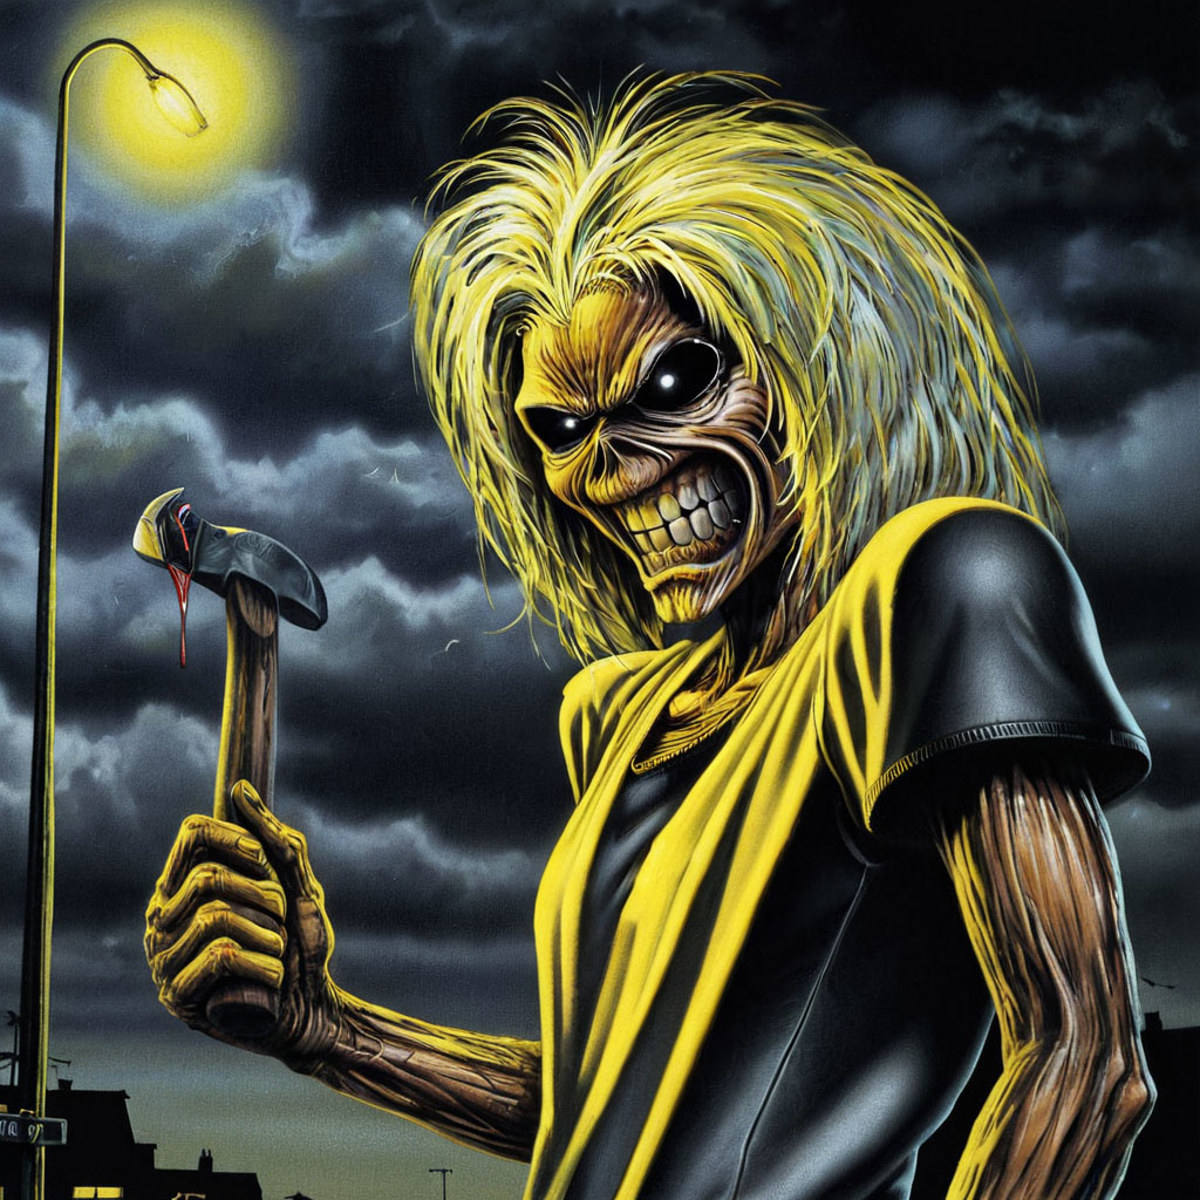 A cartoon character with long hair, a yellow shirt, and a menacing expression holding a hammer.